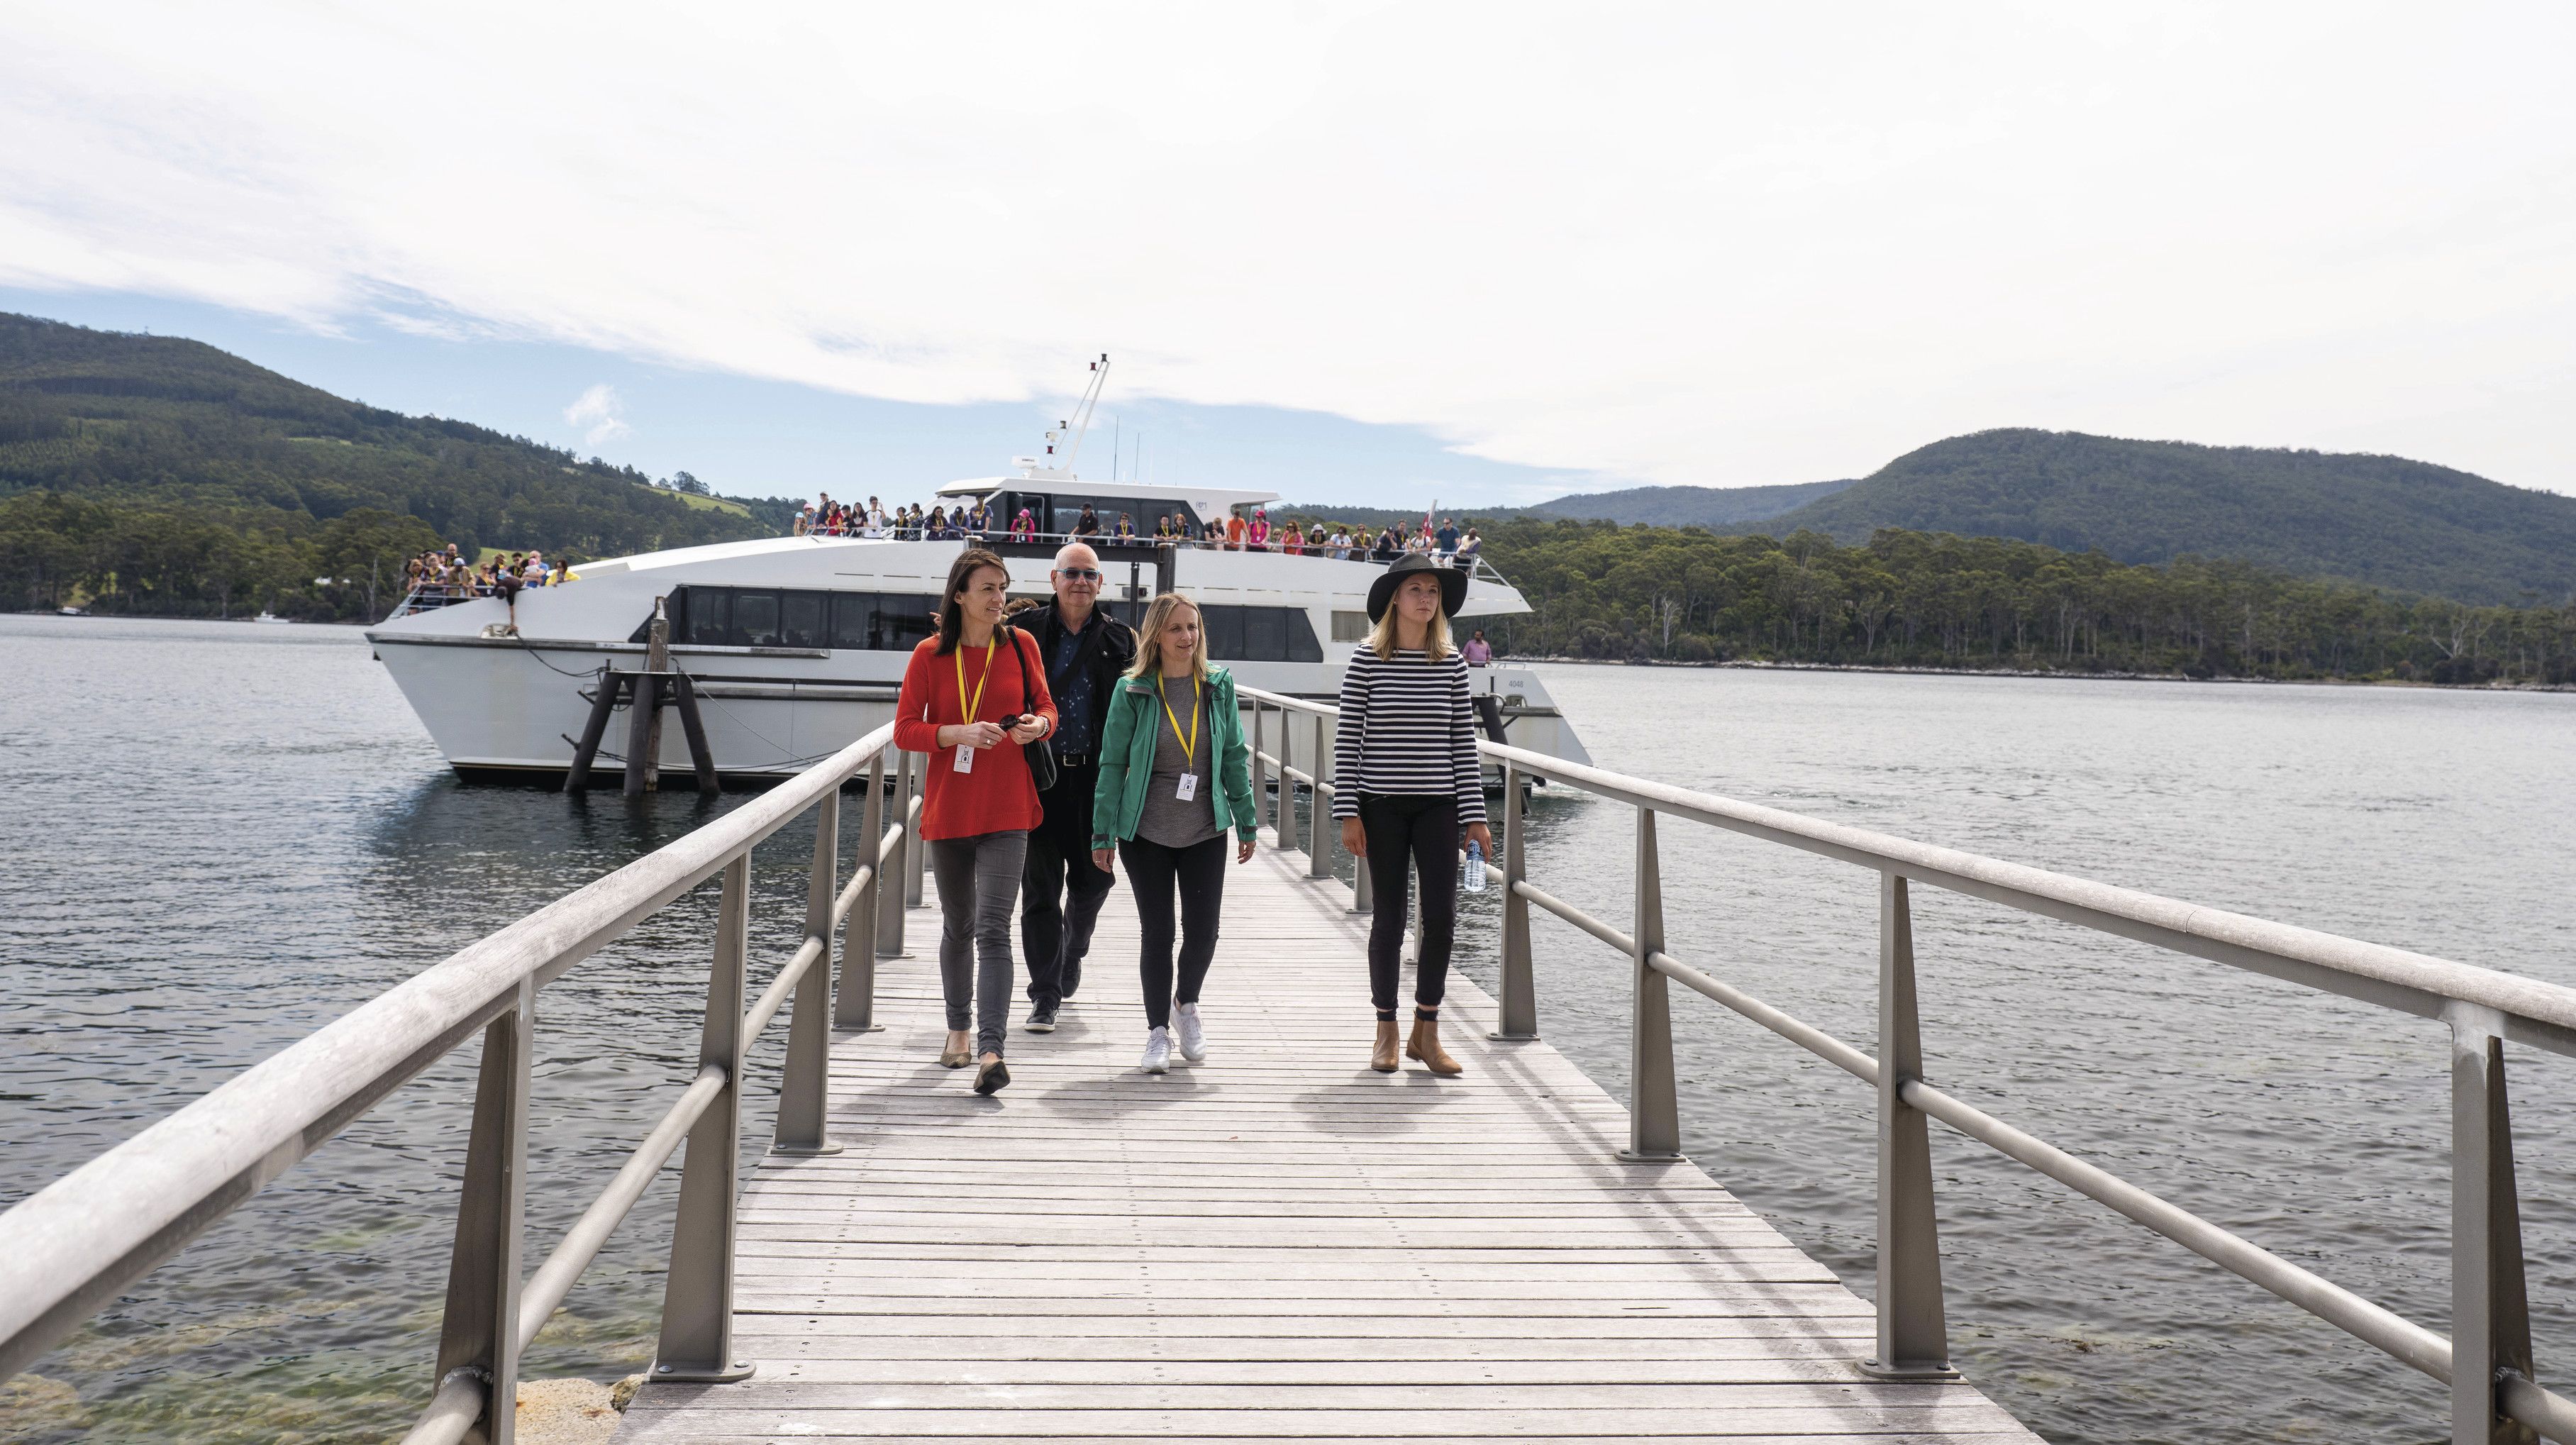 Tourists leaving the boat to walk along the bridge of the Isle of the Dead - Port Arthur Historic Site.